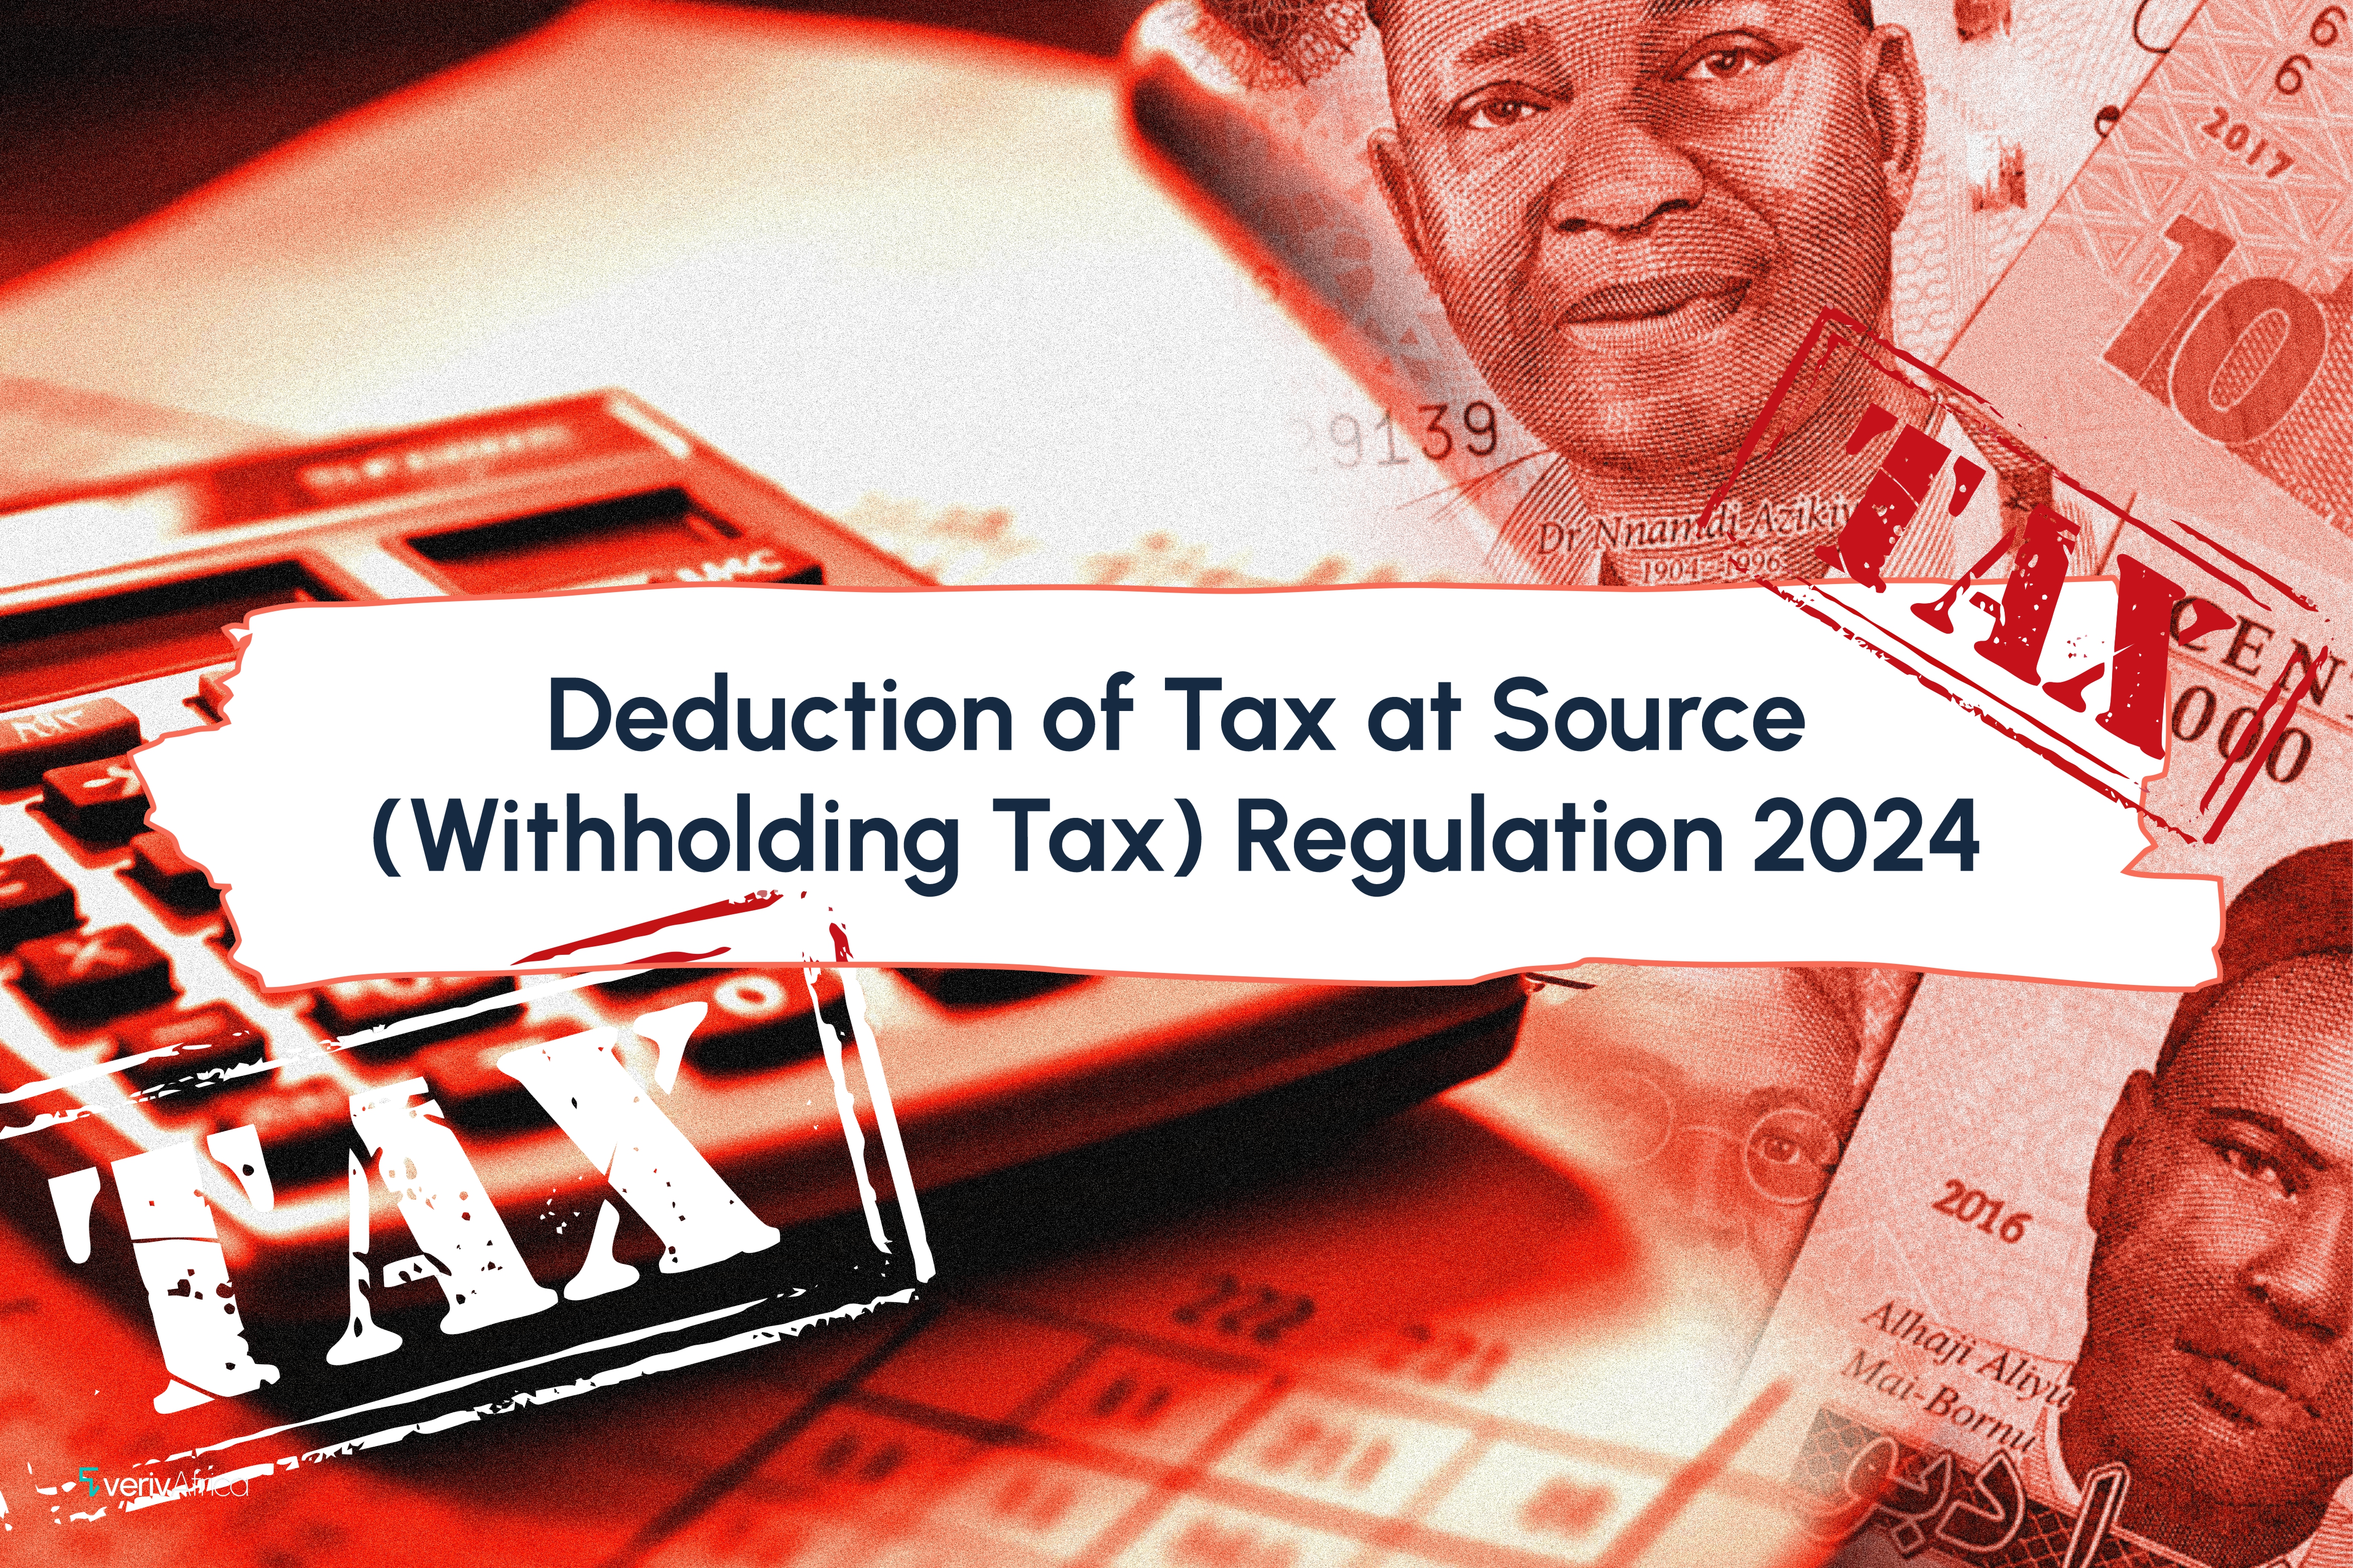 Deduction of Tax at Source (Withholding Tax) Regulation 2024